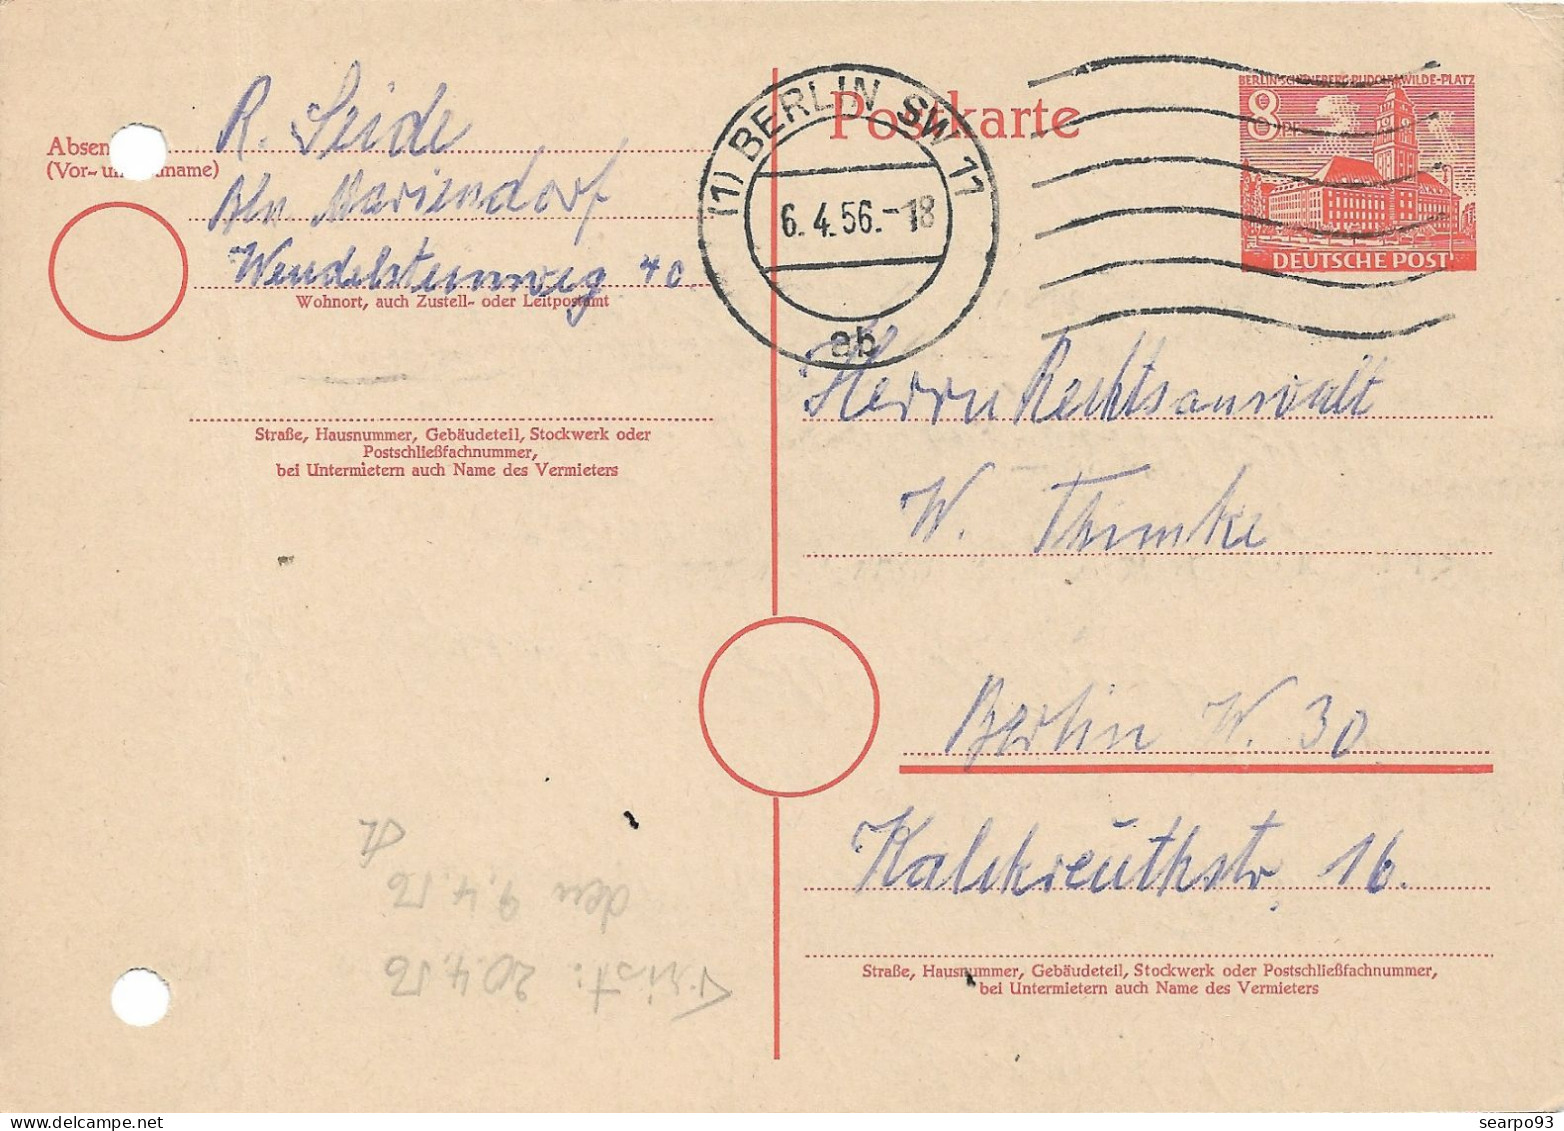 GERMANY. POSTAL STATIONERY FROM BERLIN. 1956 - Postcards - Used